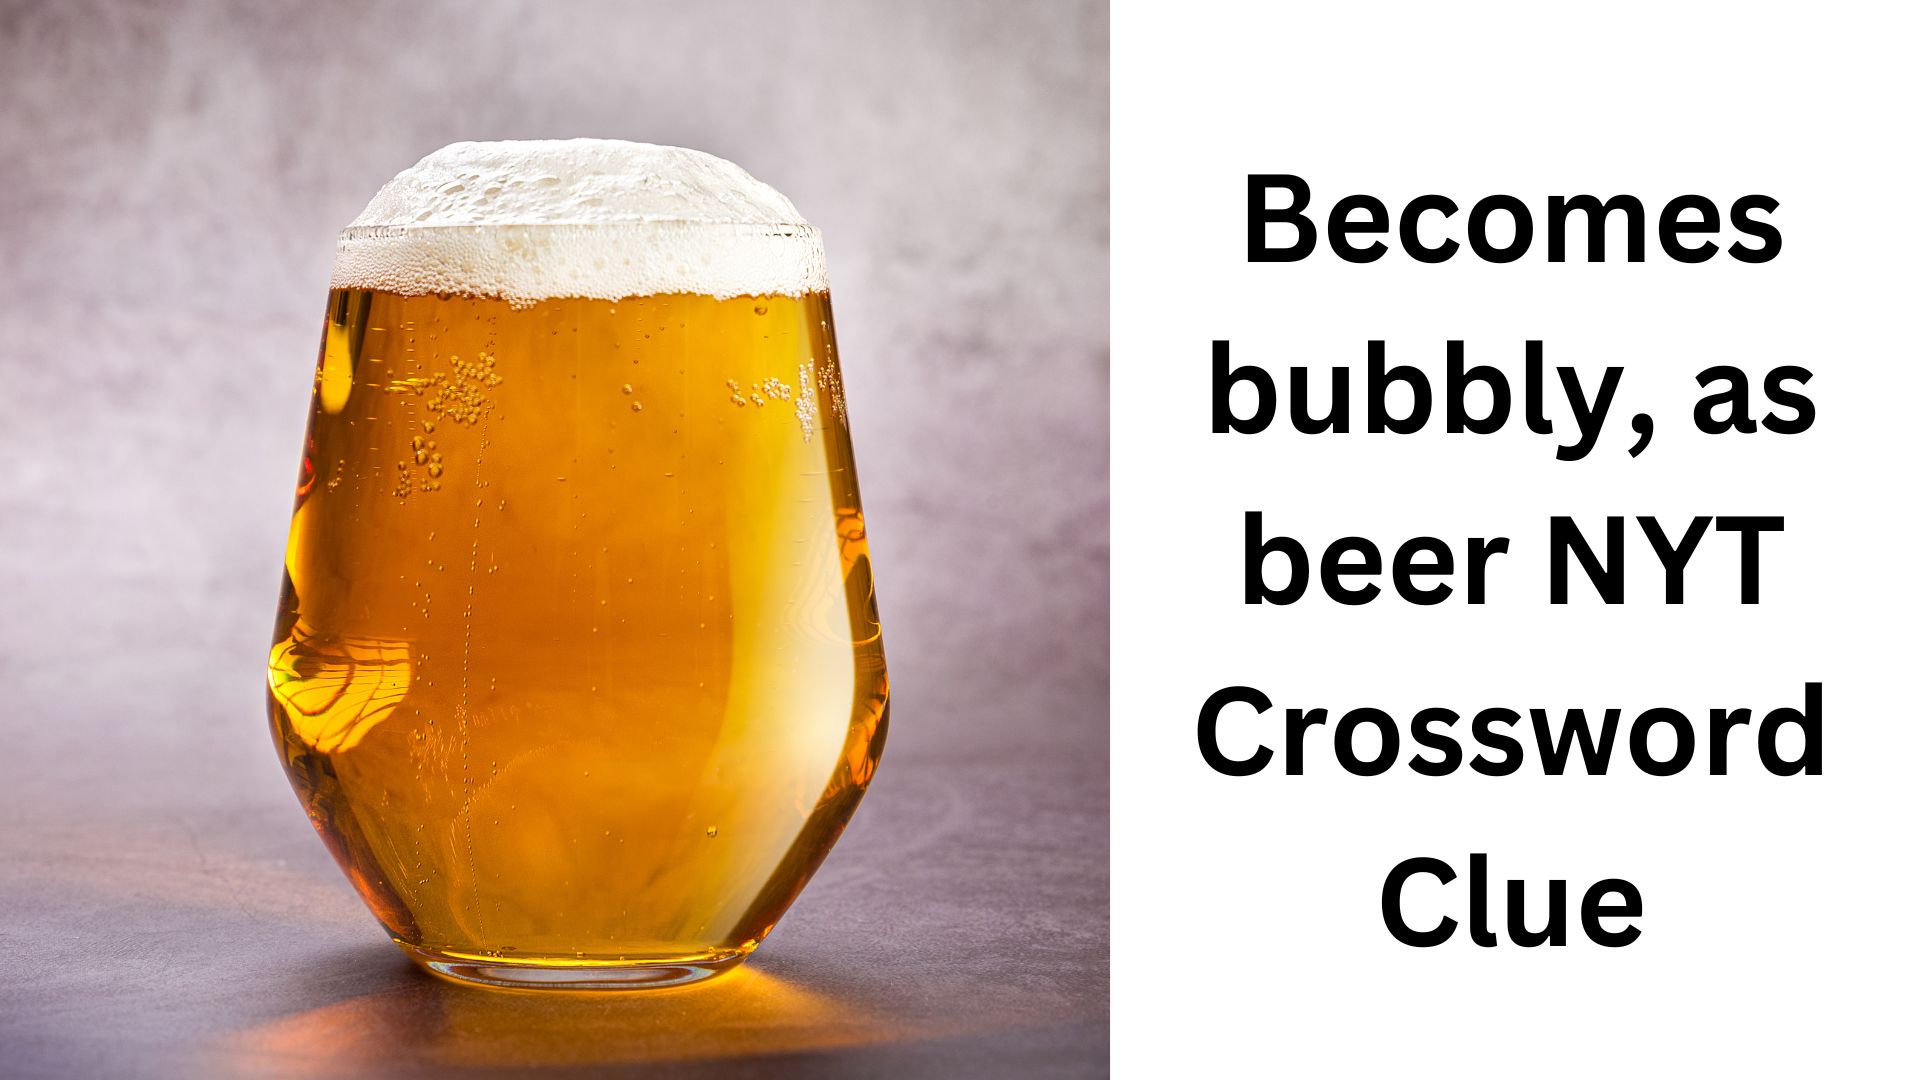 Becomes bubbly, as beer NYT Crossword Clue